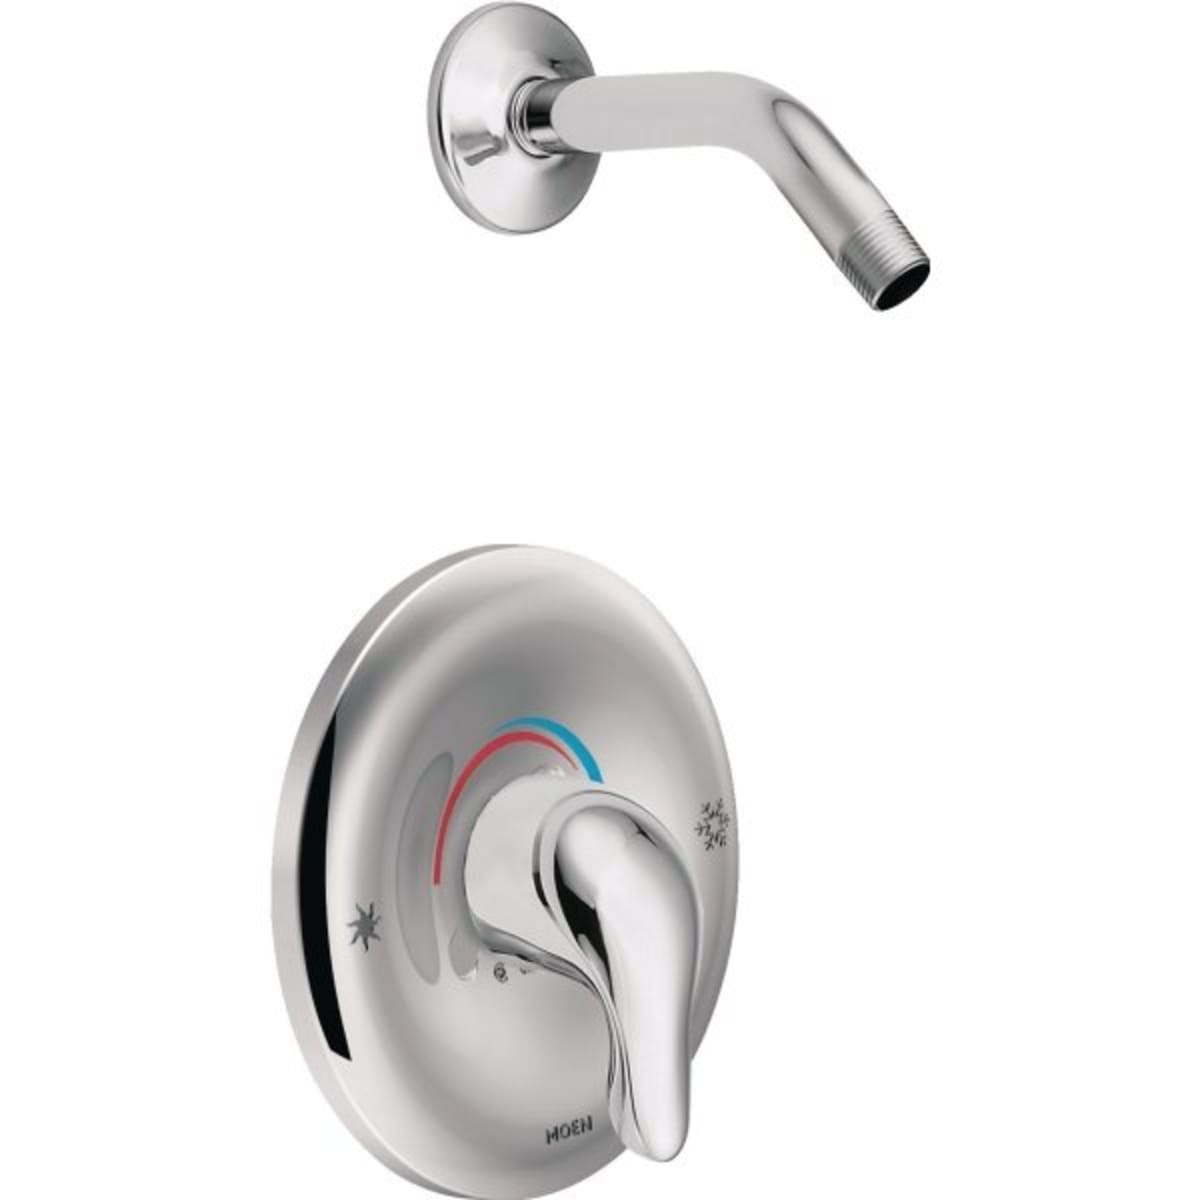 Need Hotter Showers Fast: Master Moen Positemp Shower Handles With 10 Easy Steps